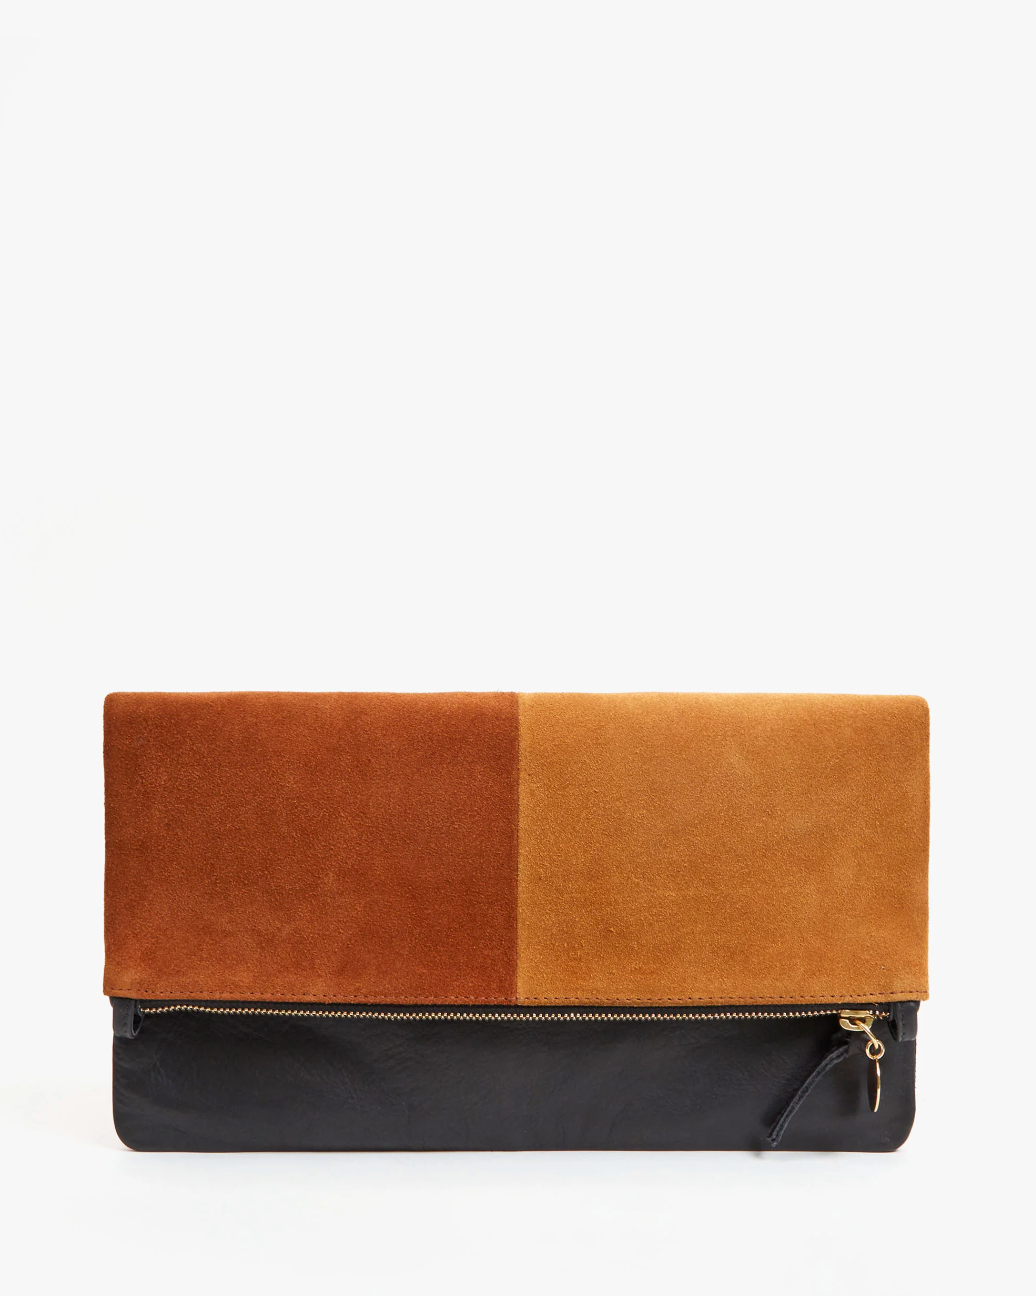 Clare V | Foldover Clutch with Tabs - V-Patchwork Multi